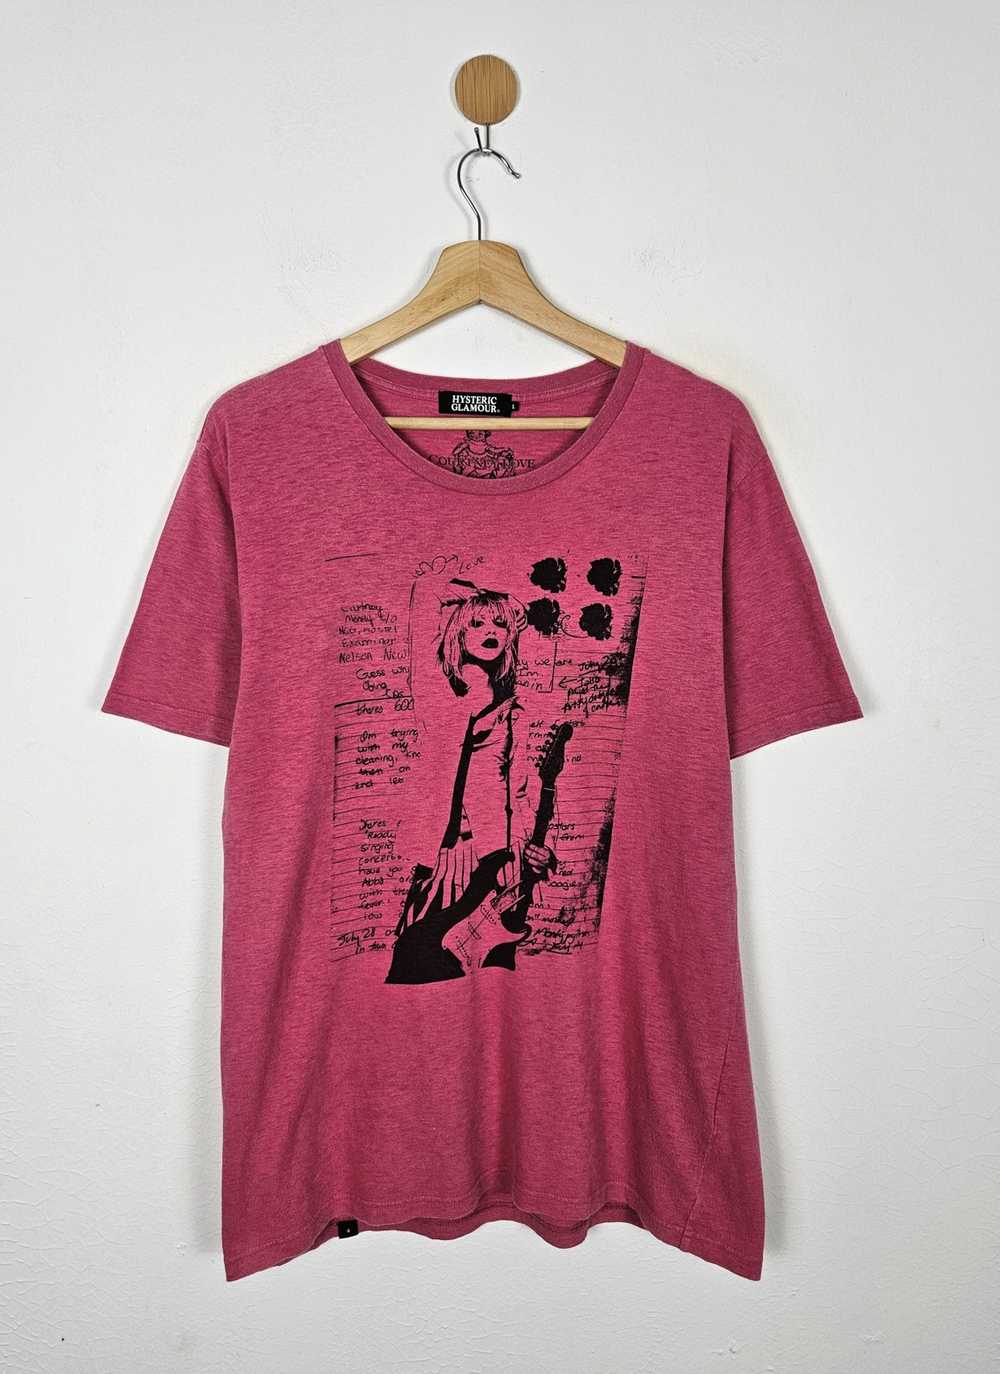 Hysteric Glamour Hysteric Glamour Courtney Love H… - image 1